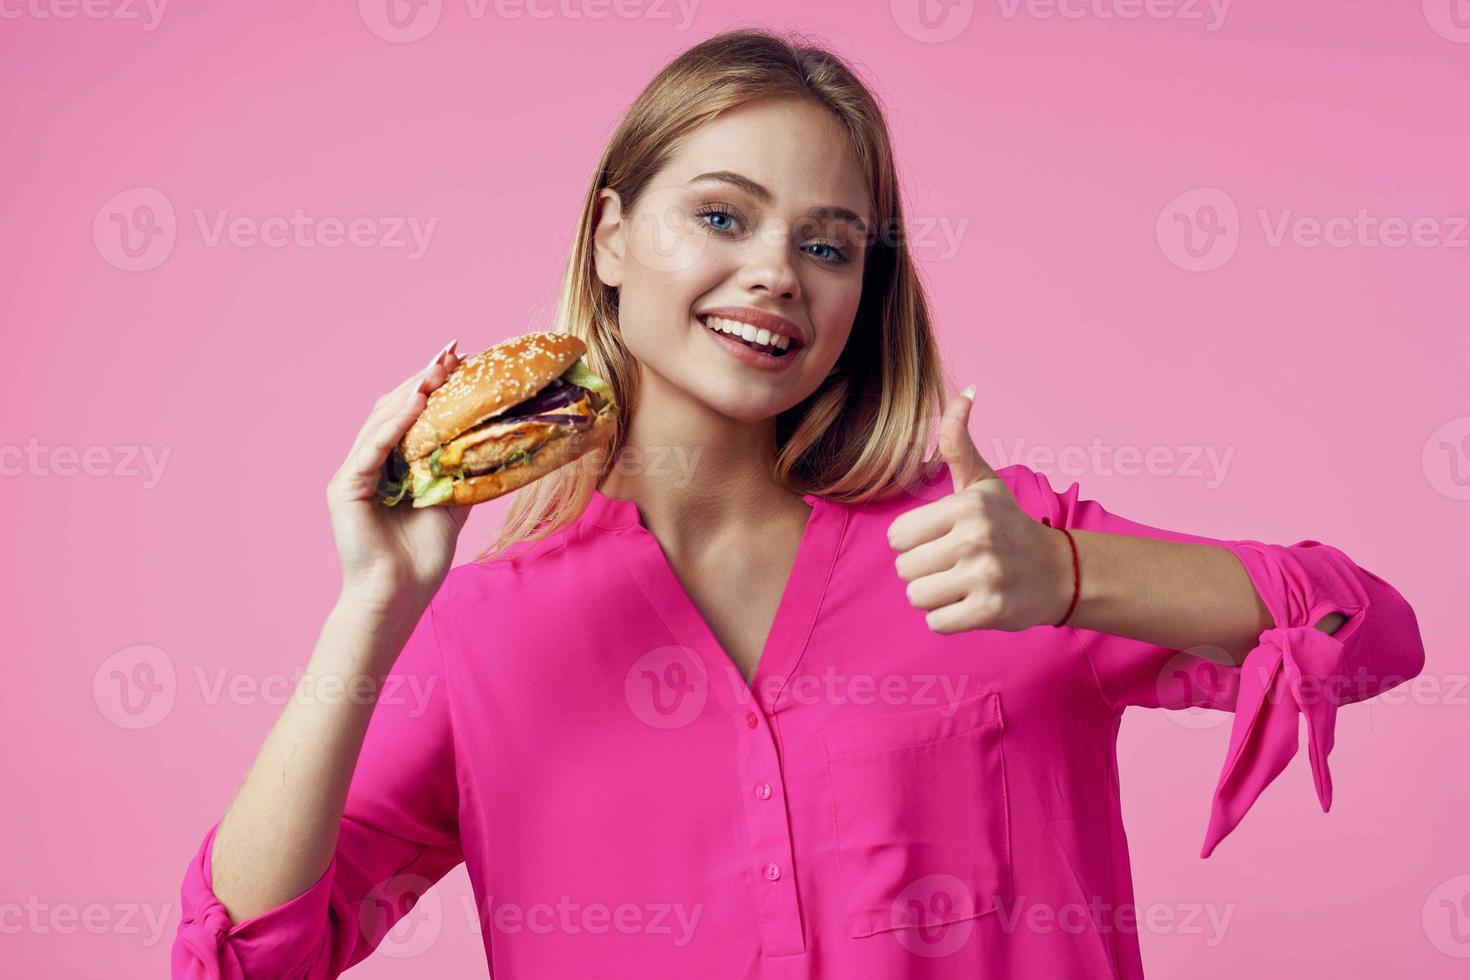 cheerful blonde in a pink shirt hamburger fast food snack photo